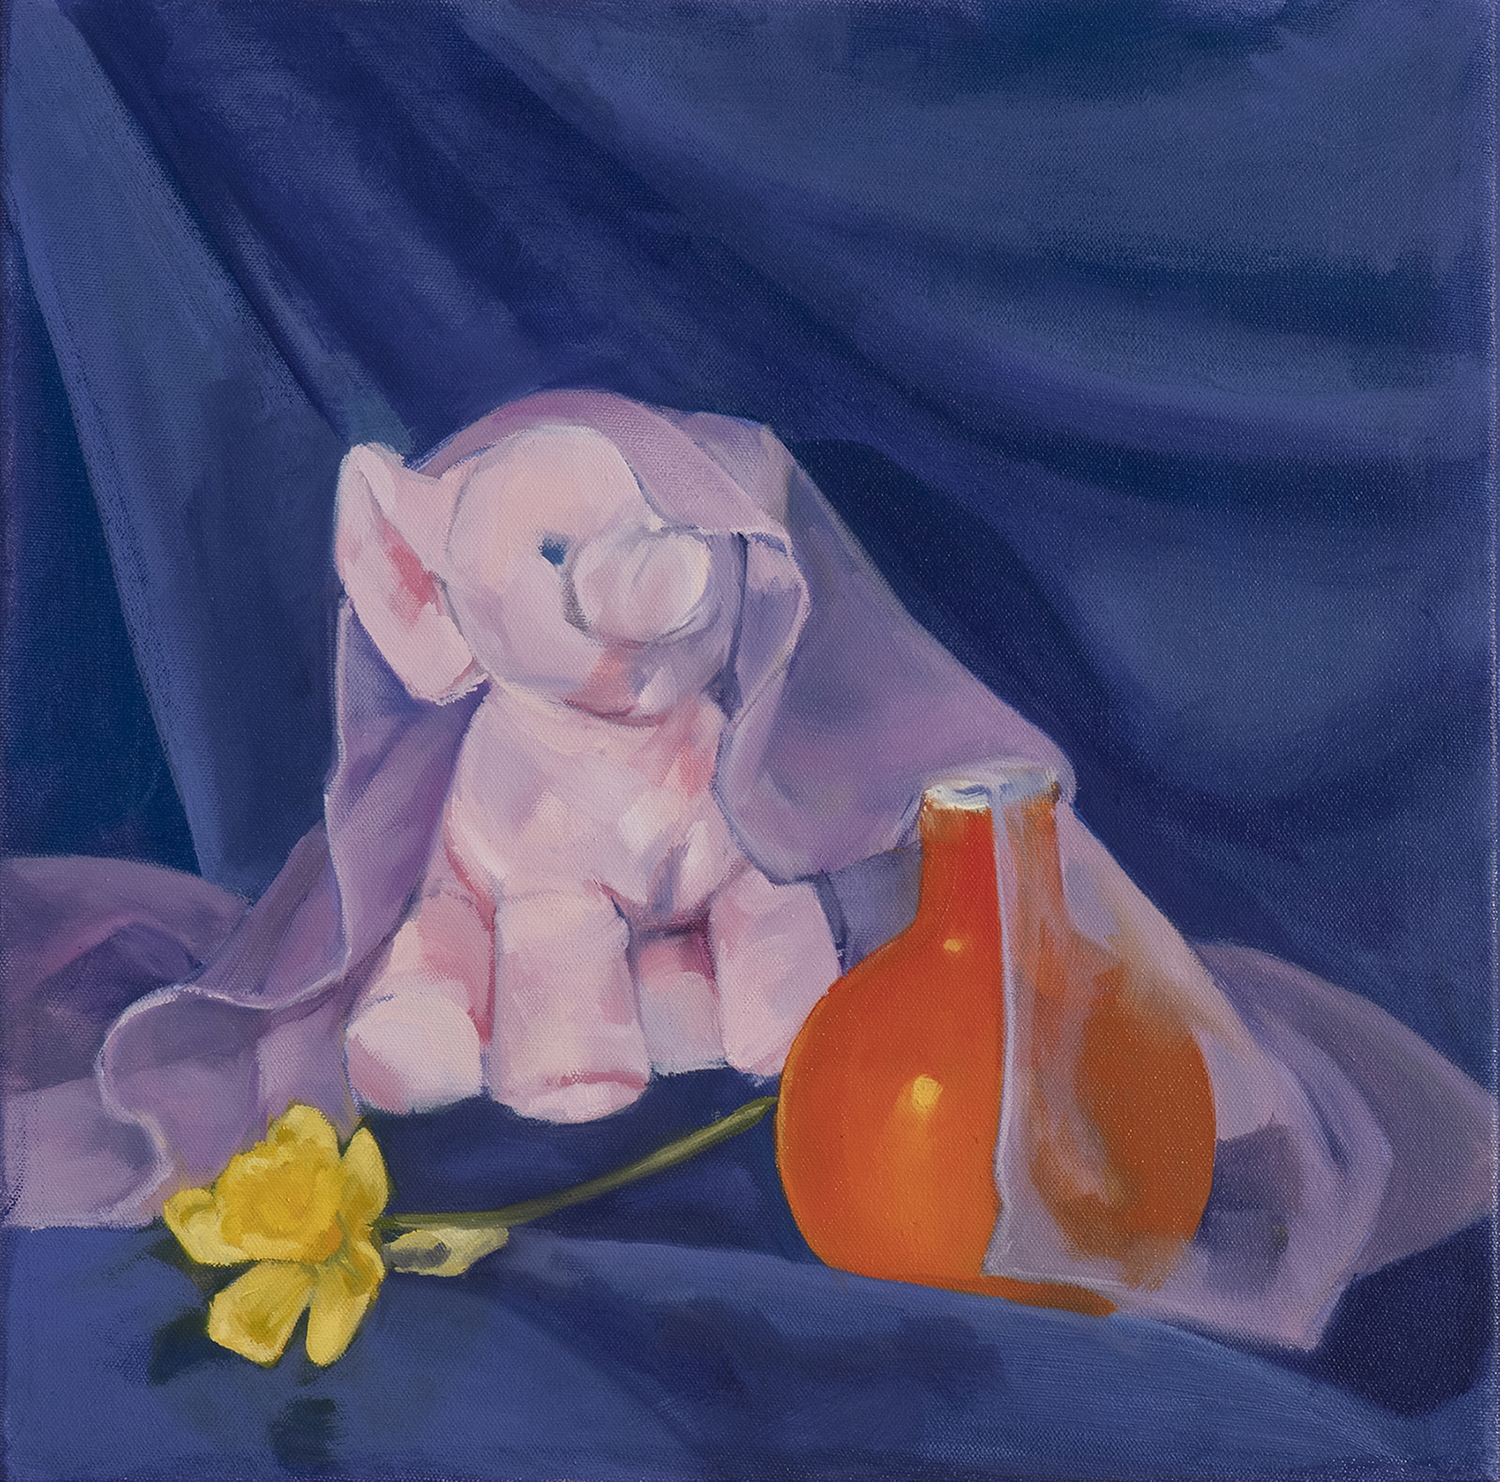 A still life painting of an elephant stuffed animation next to a flower and a vase.